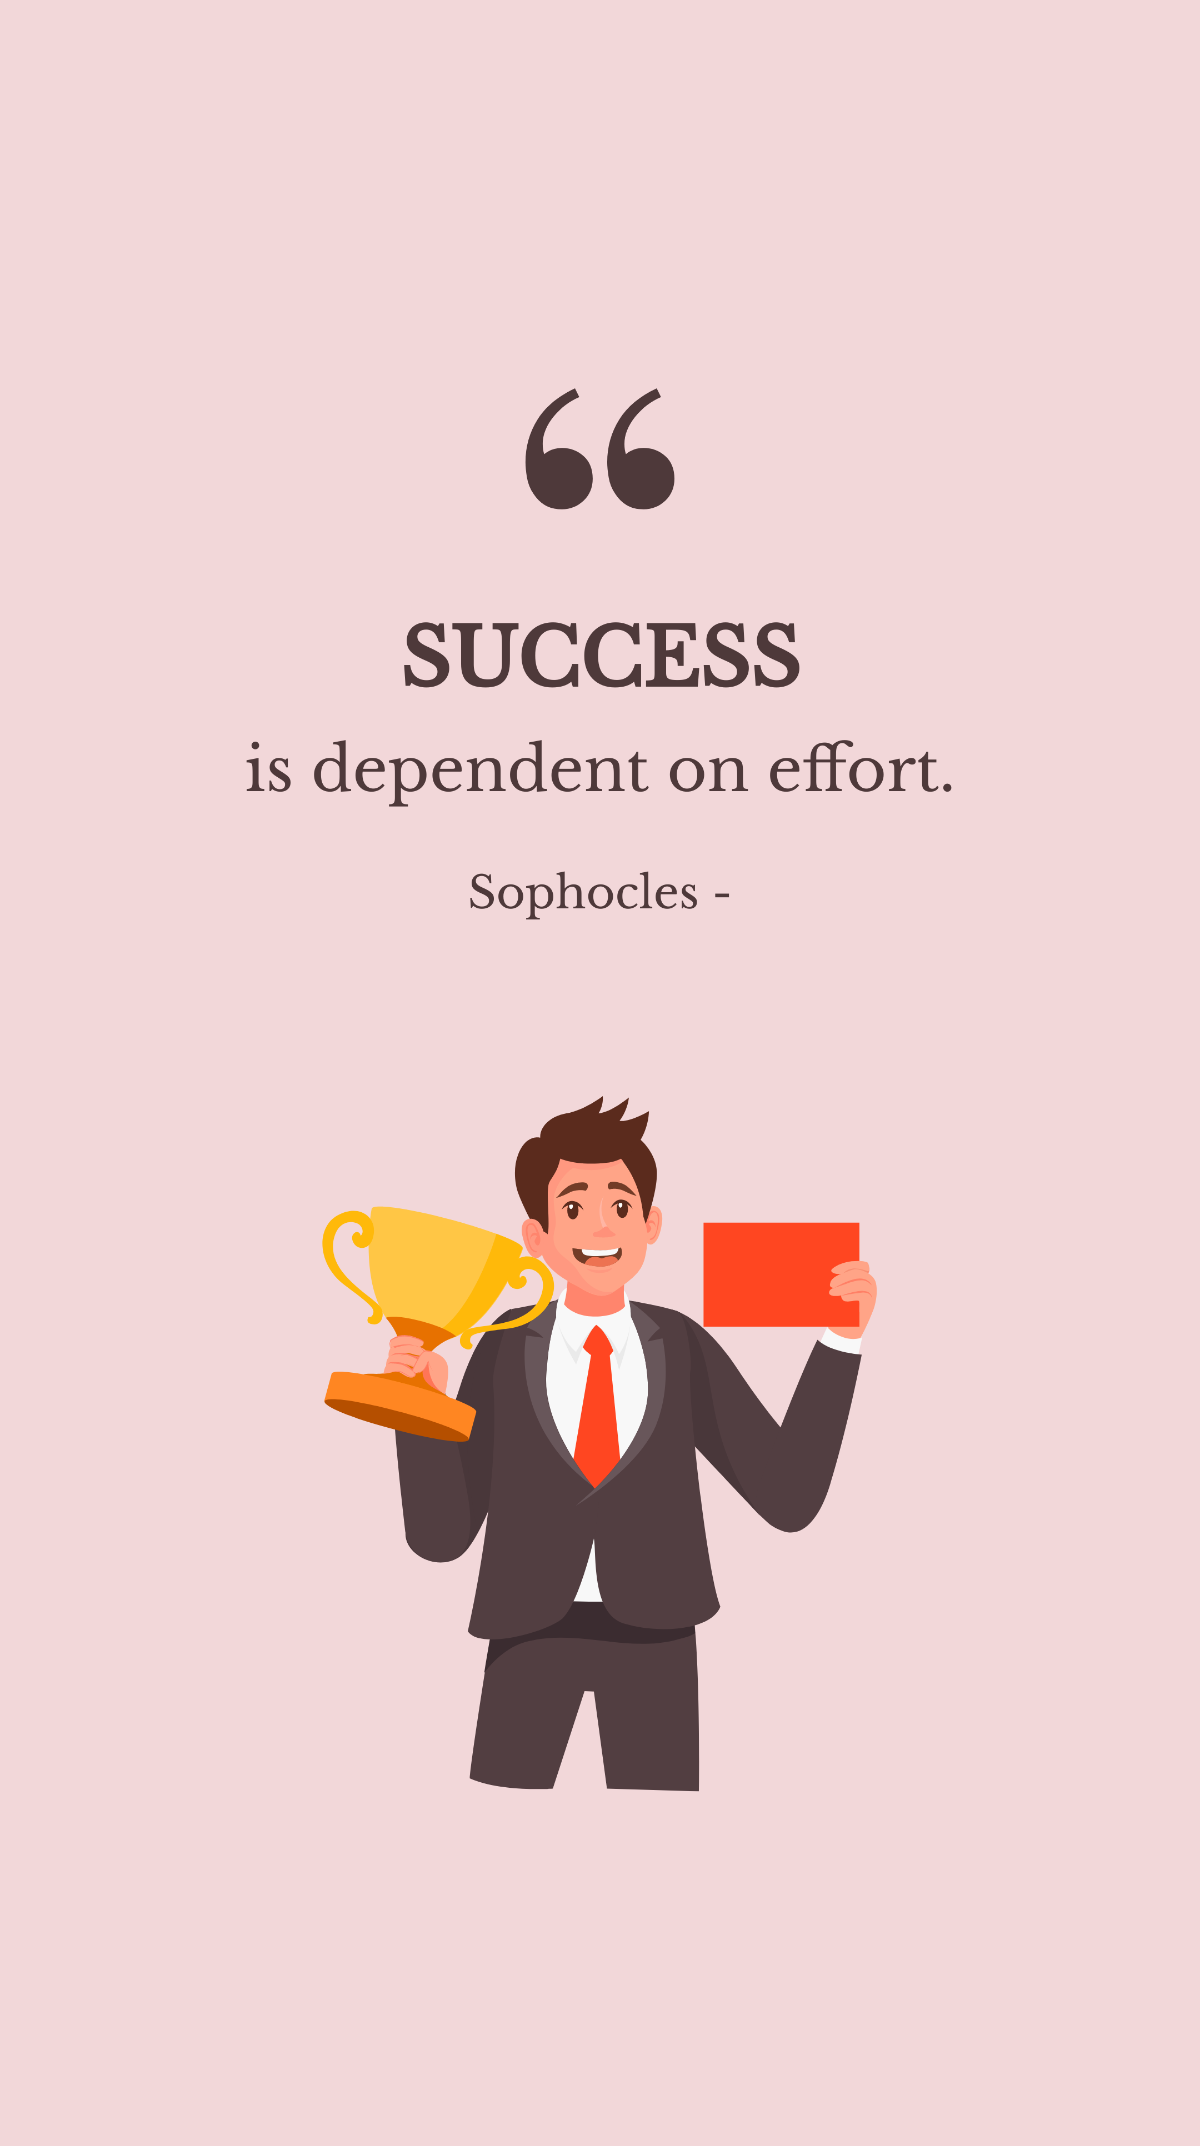 Sophocles - Success is dependent on effort. Template